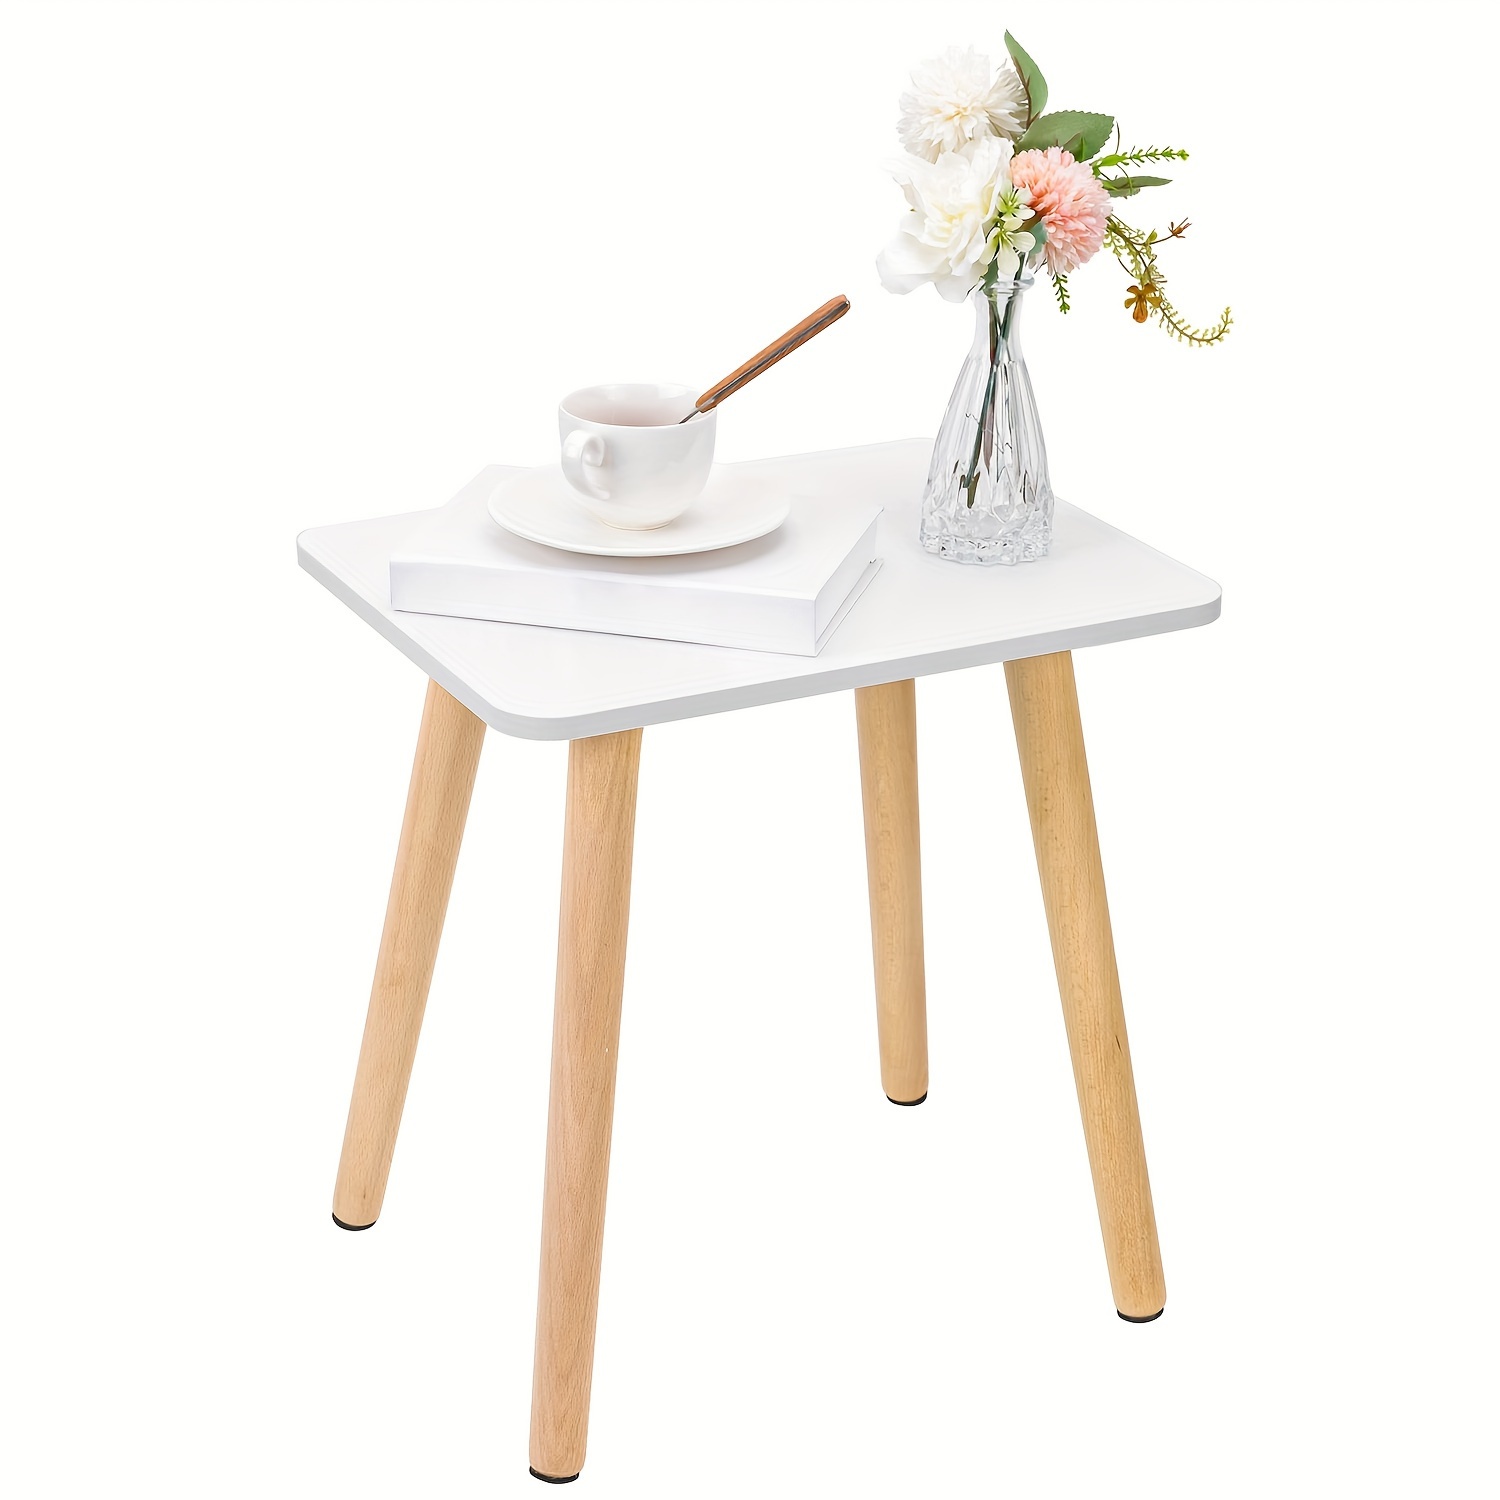 

1 Pc White Side Table, Square Table, Small Table, Used As A Garden Side Table Or Plant Stand, Suitable For Placing Remote Control, Coffee, Books, About 40 X 30 Cm, Height 41.91 Cm